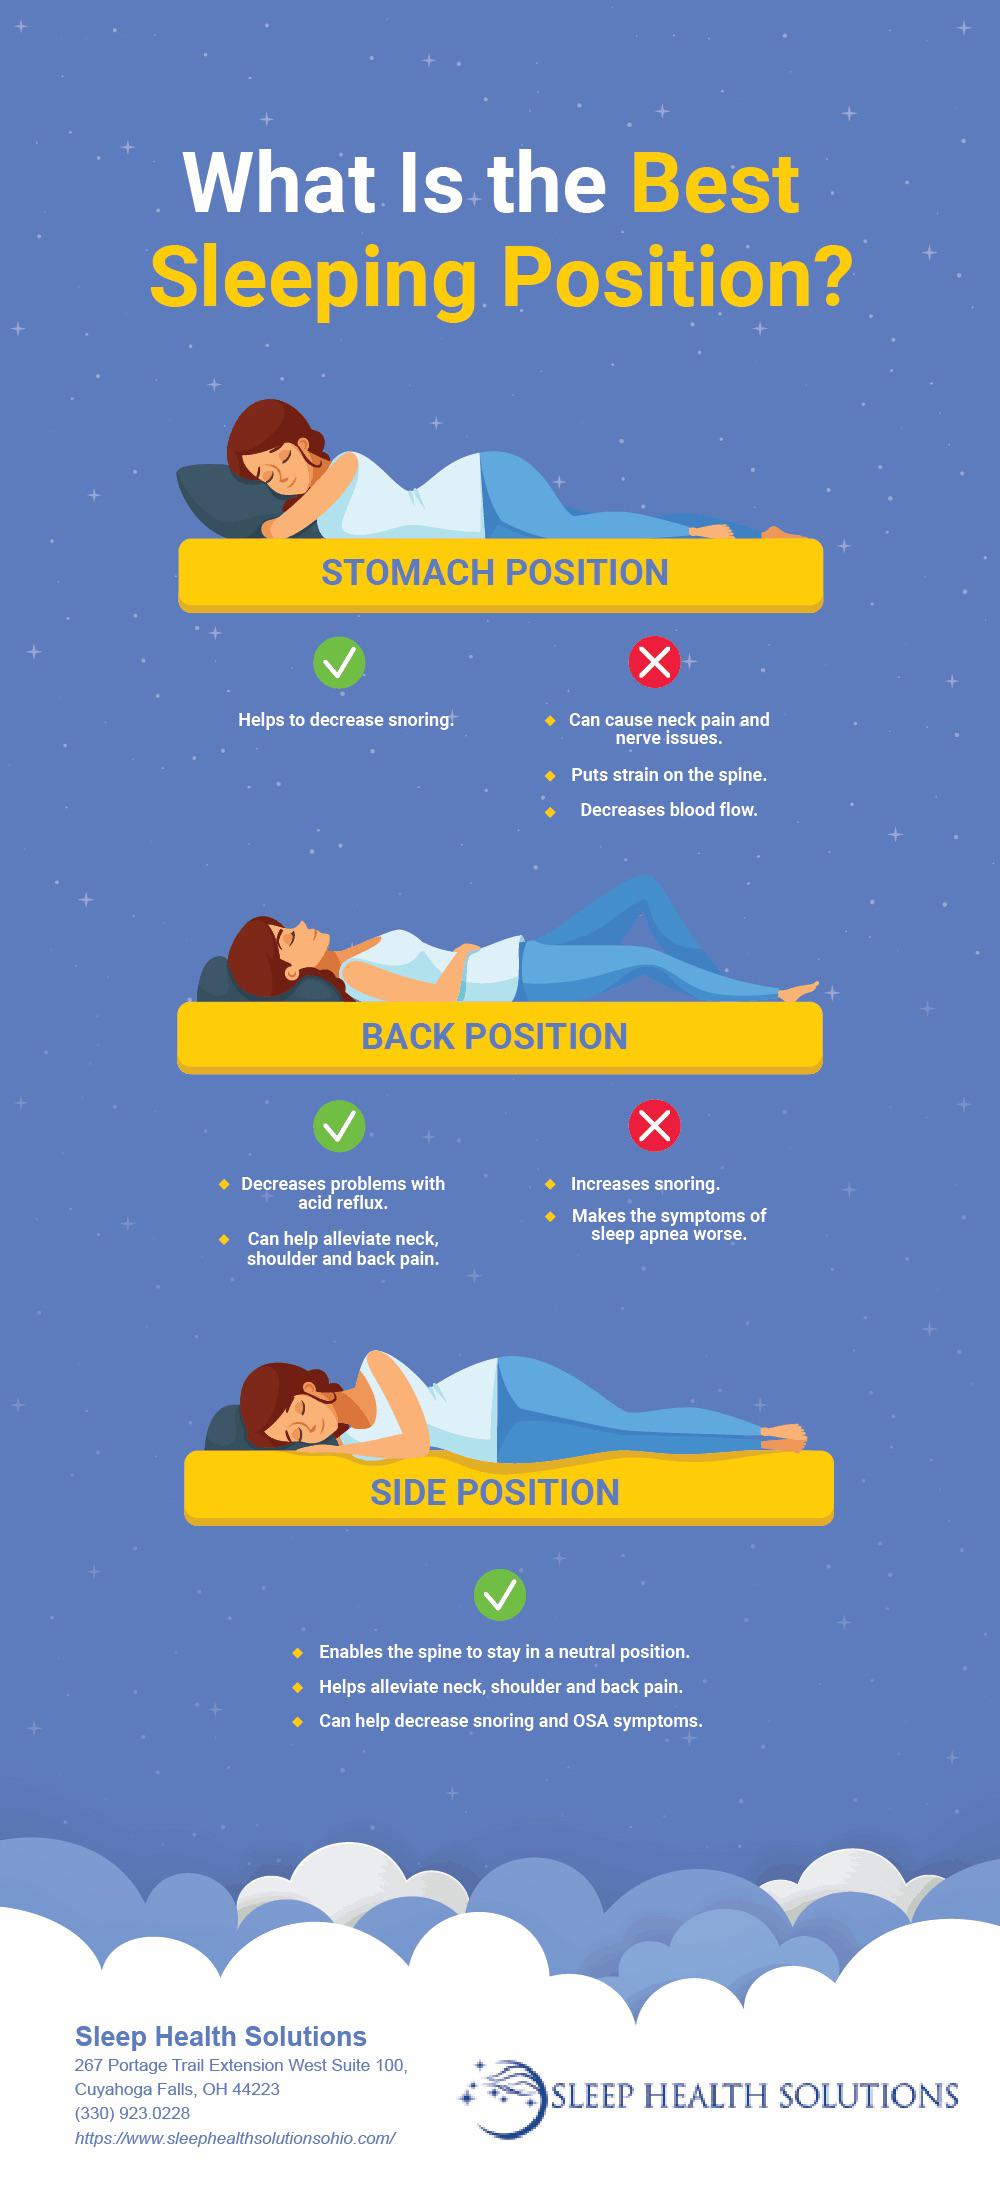 best way to sleep - What is the Best Sleeping Position? Stomach Position Helps to decrease snoring. Can cause neck pain and nerve issues. Puts strain on the spine. Decreases blood flow. Back Position Decreases problems with acid reflux. . Can help allevia